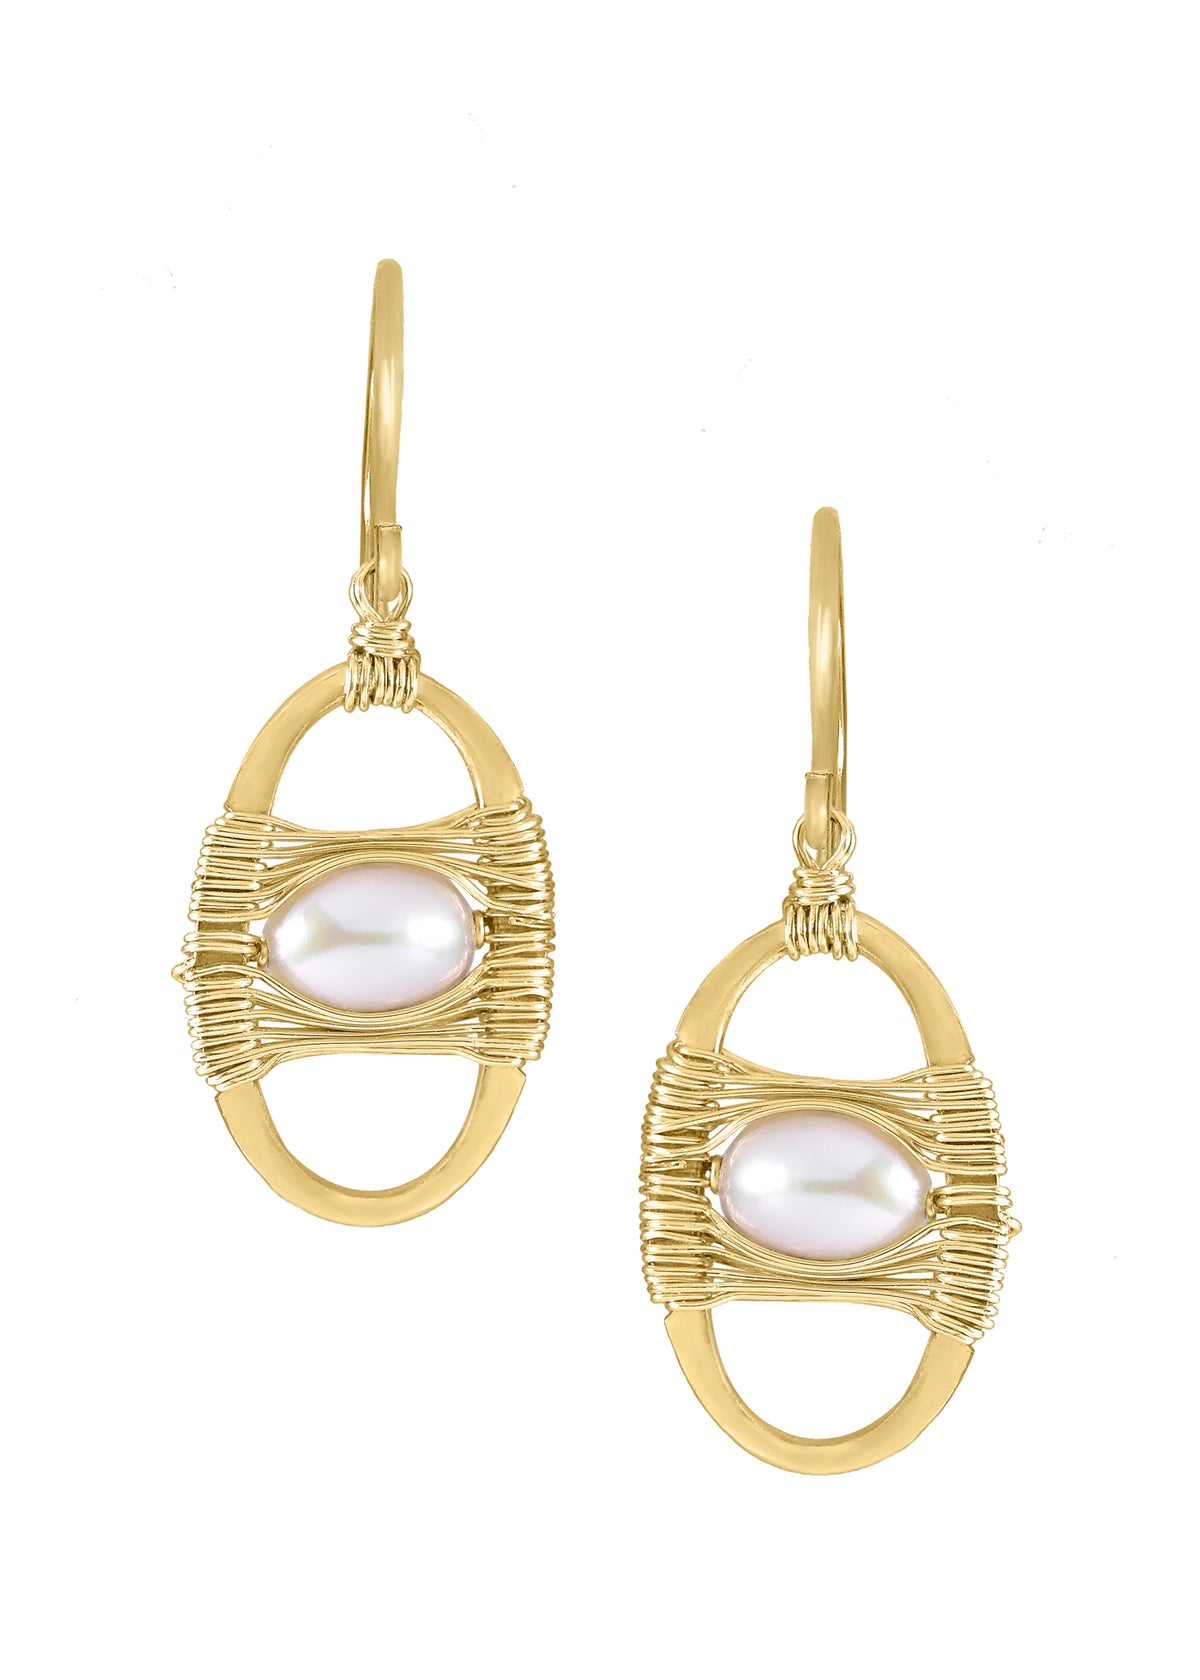 Freshwater pearl 14k gold fill Earrings measure 1-1/8&quot; in length (including the ear wires) and 7/16&quot; in width at the widest point Handmade in our Los Angeles studio